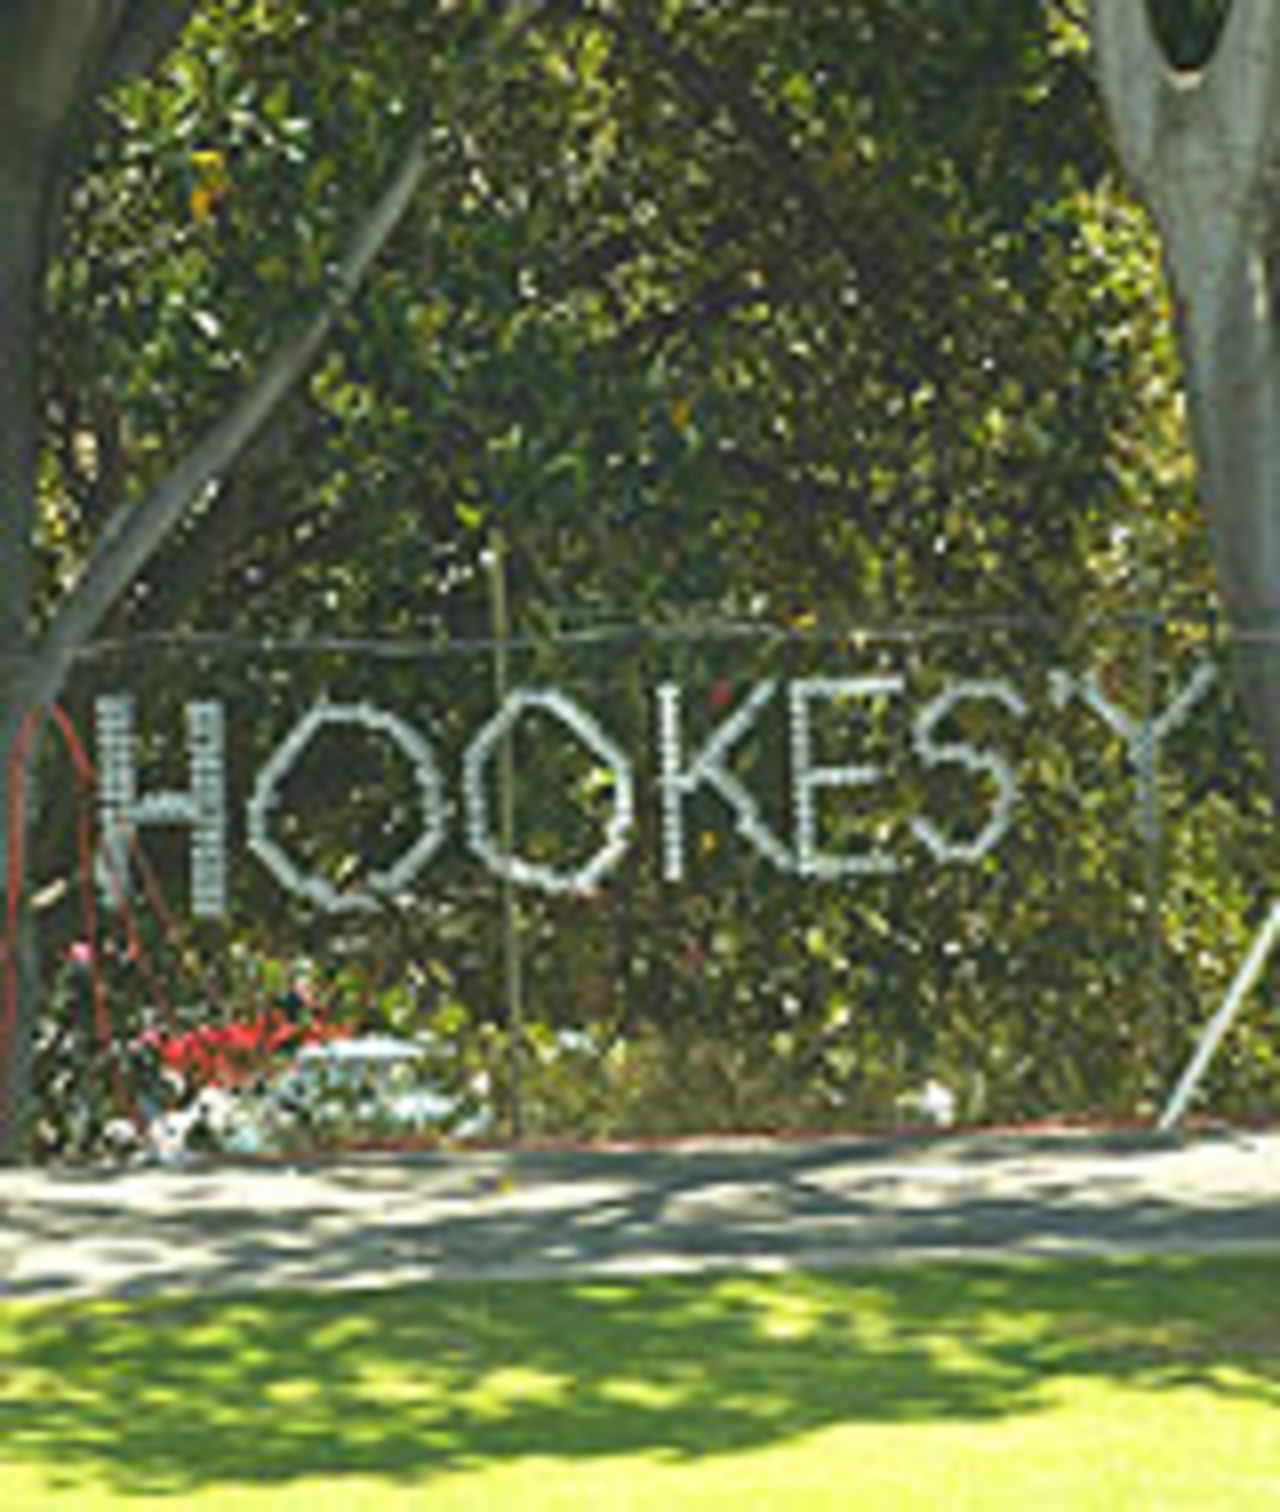 Floral tribute to David Hookes, Adelaide, 2004